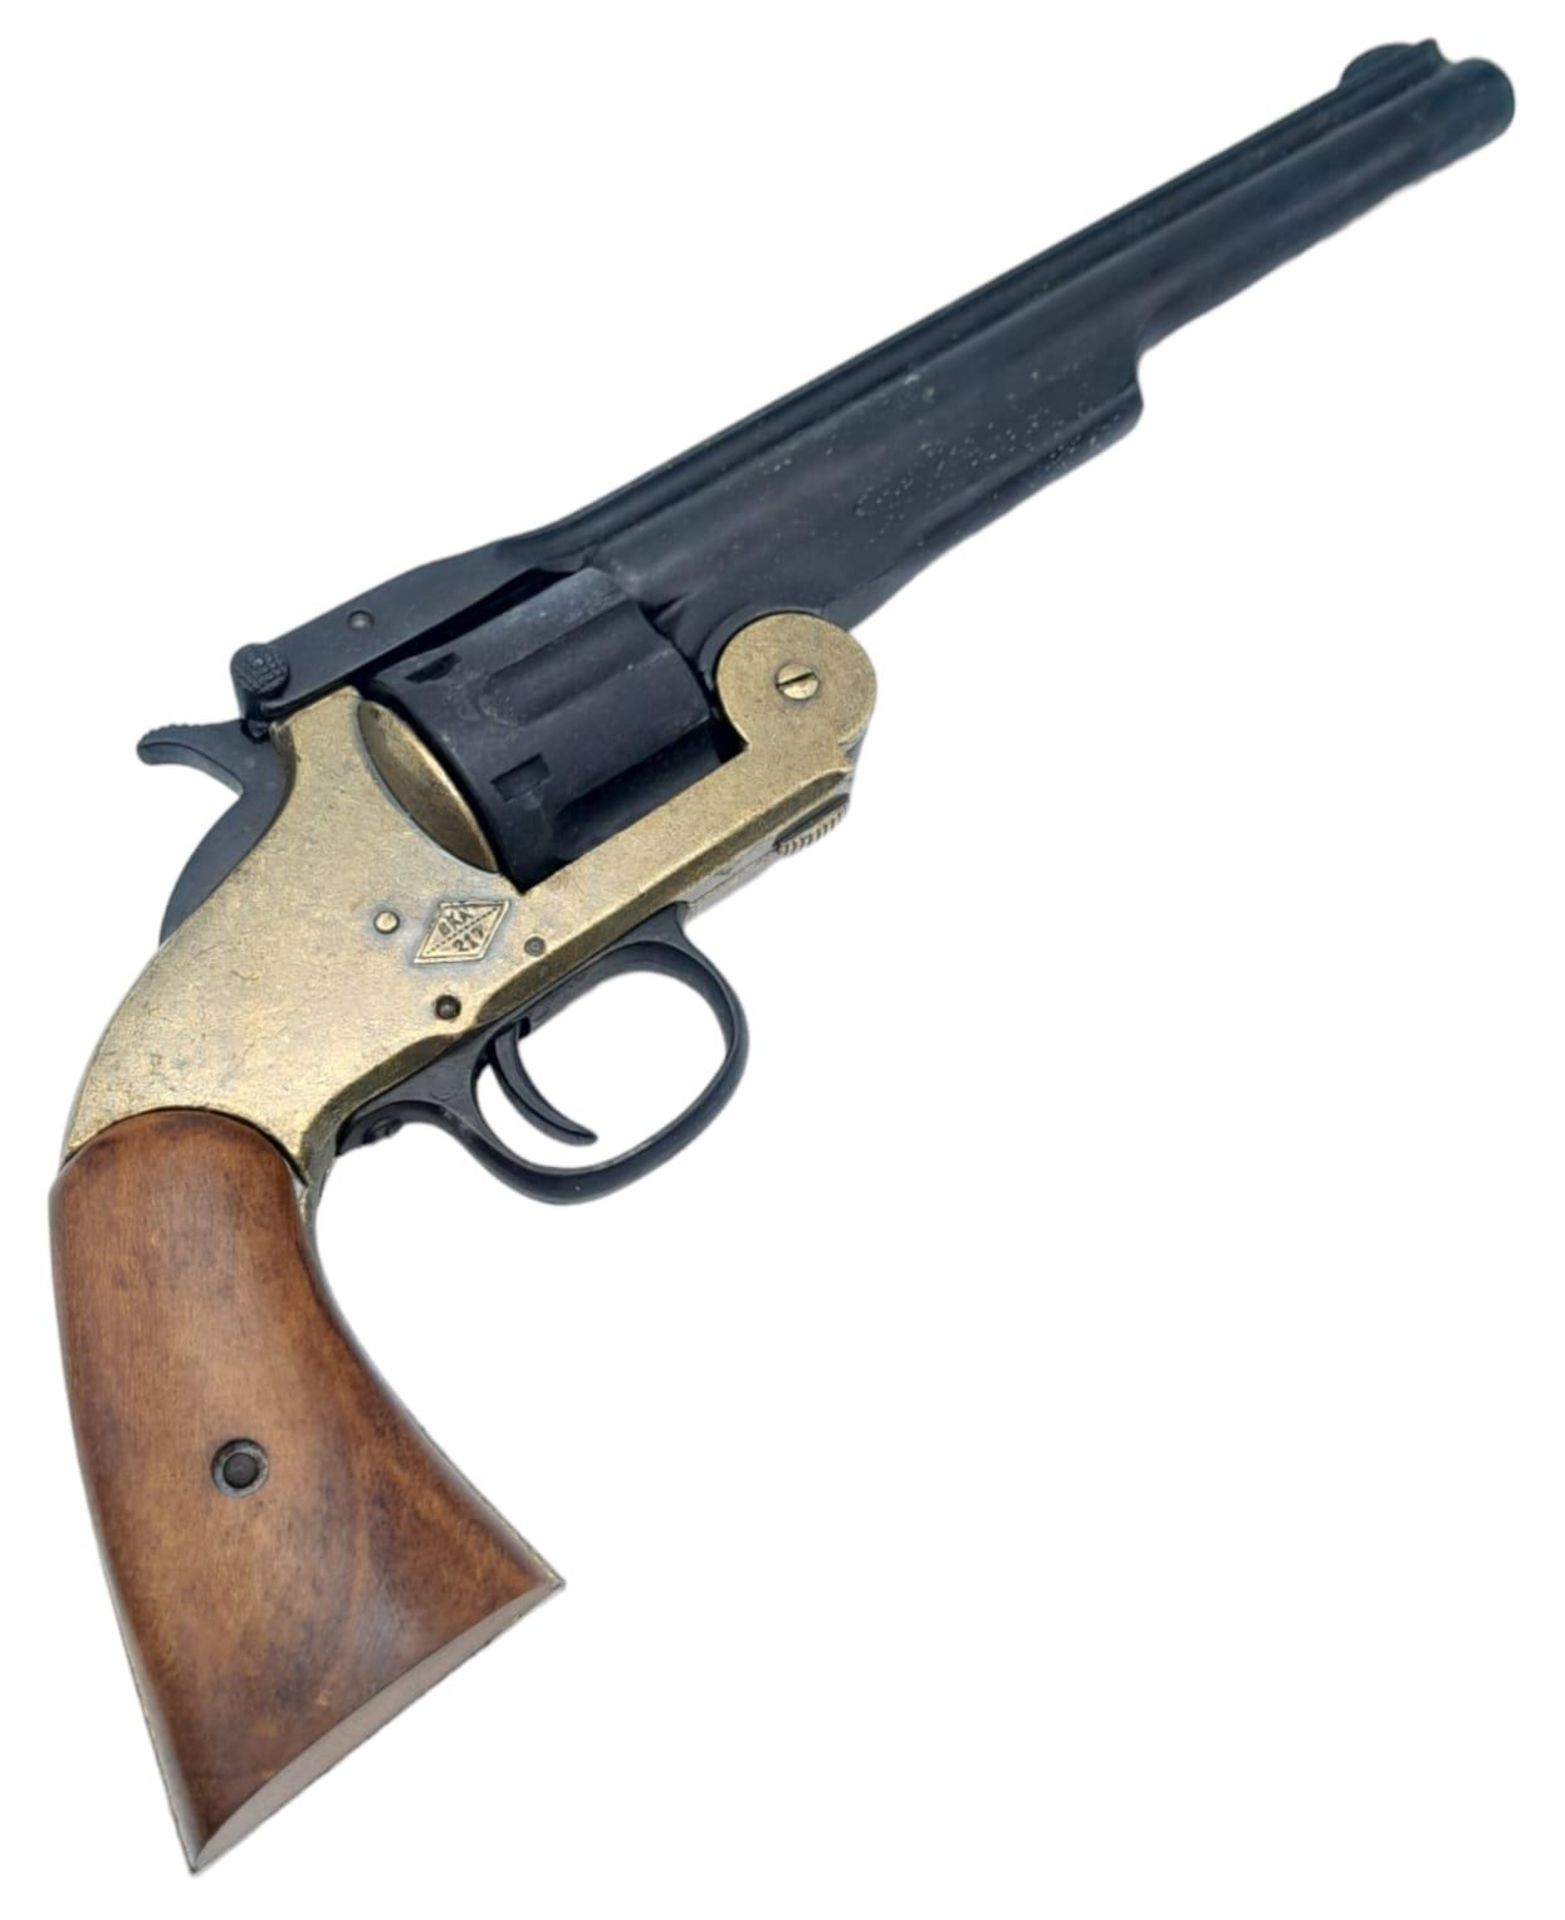 A FULL SIZE METAL REPLICA NAVY COLT SIX CHAMBER PISTOL WITH DRY FIRING ACTION AND REVOLVING BARREL - Image 4 of 8